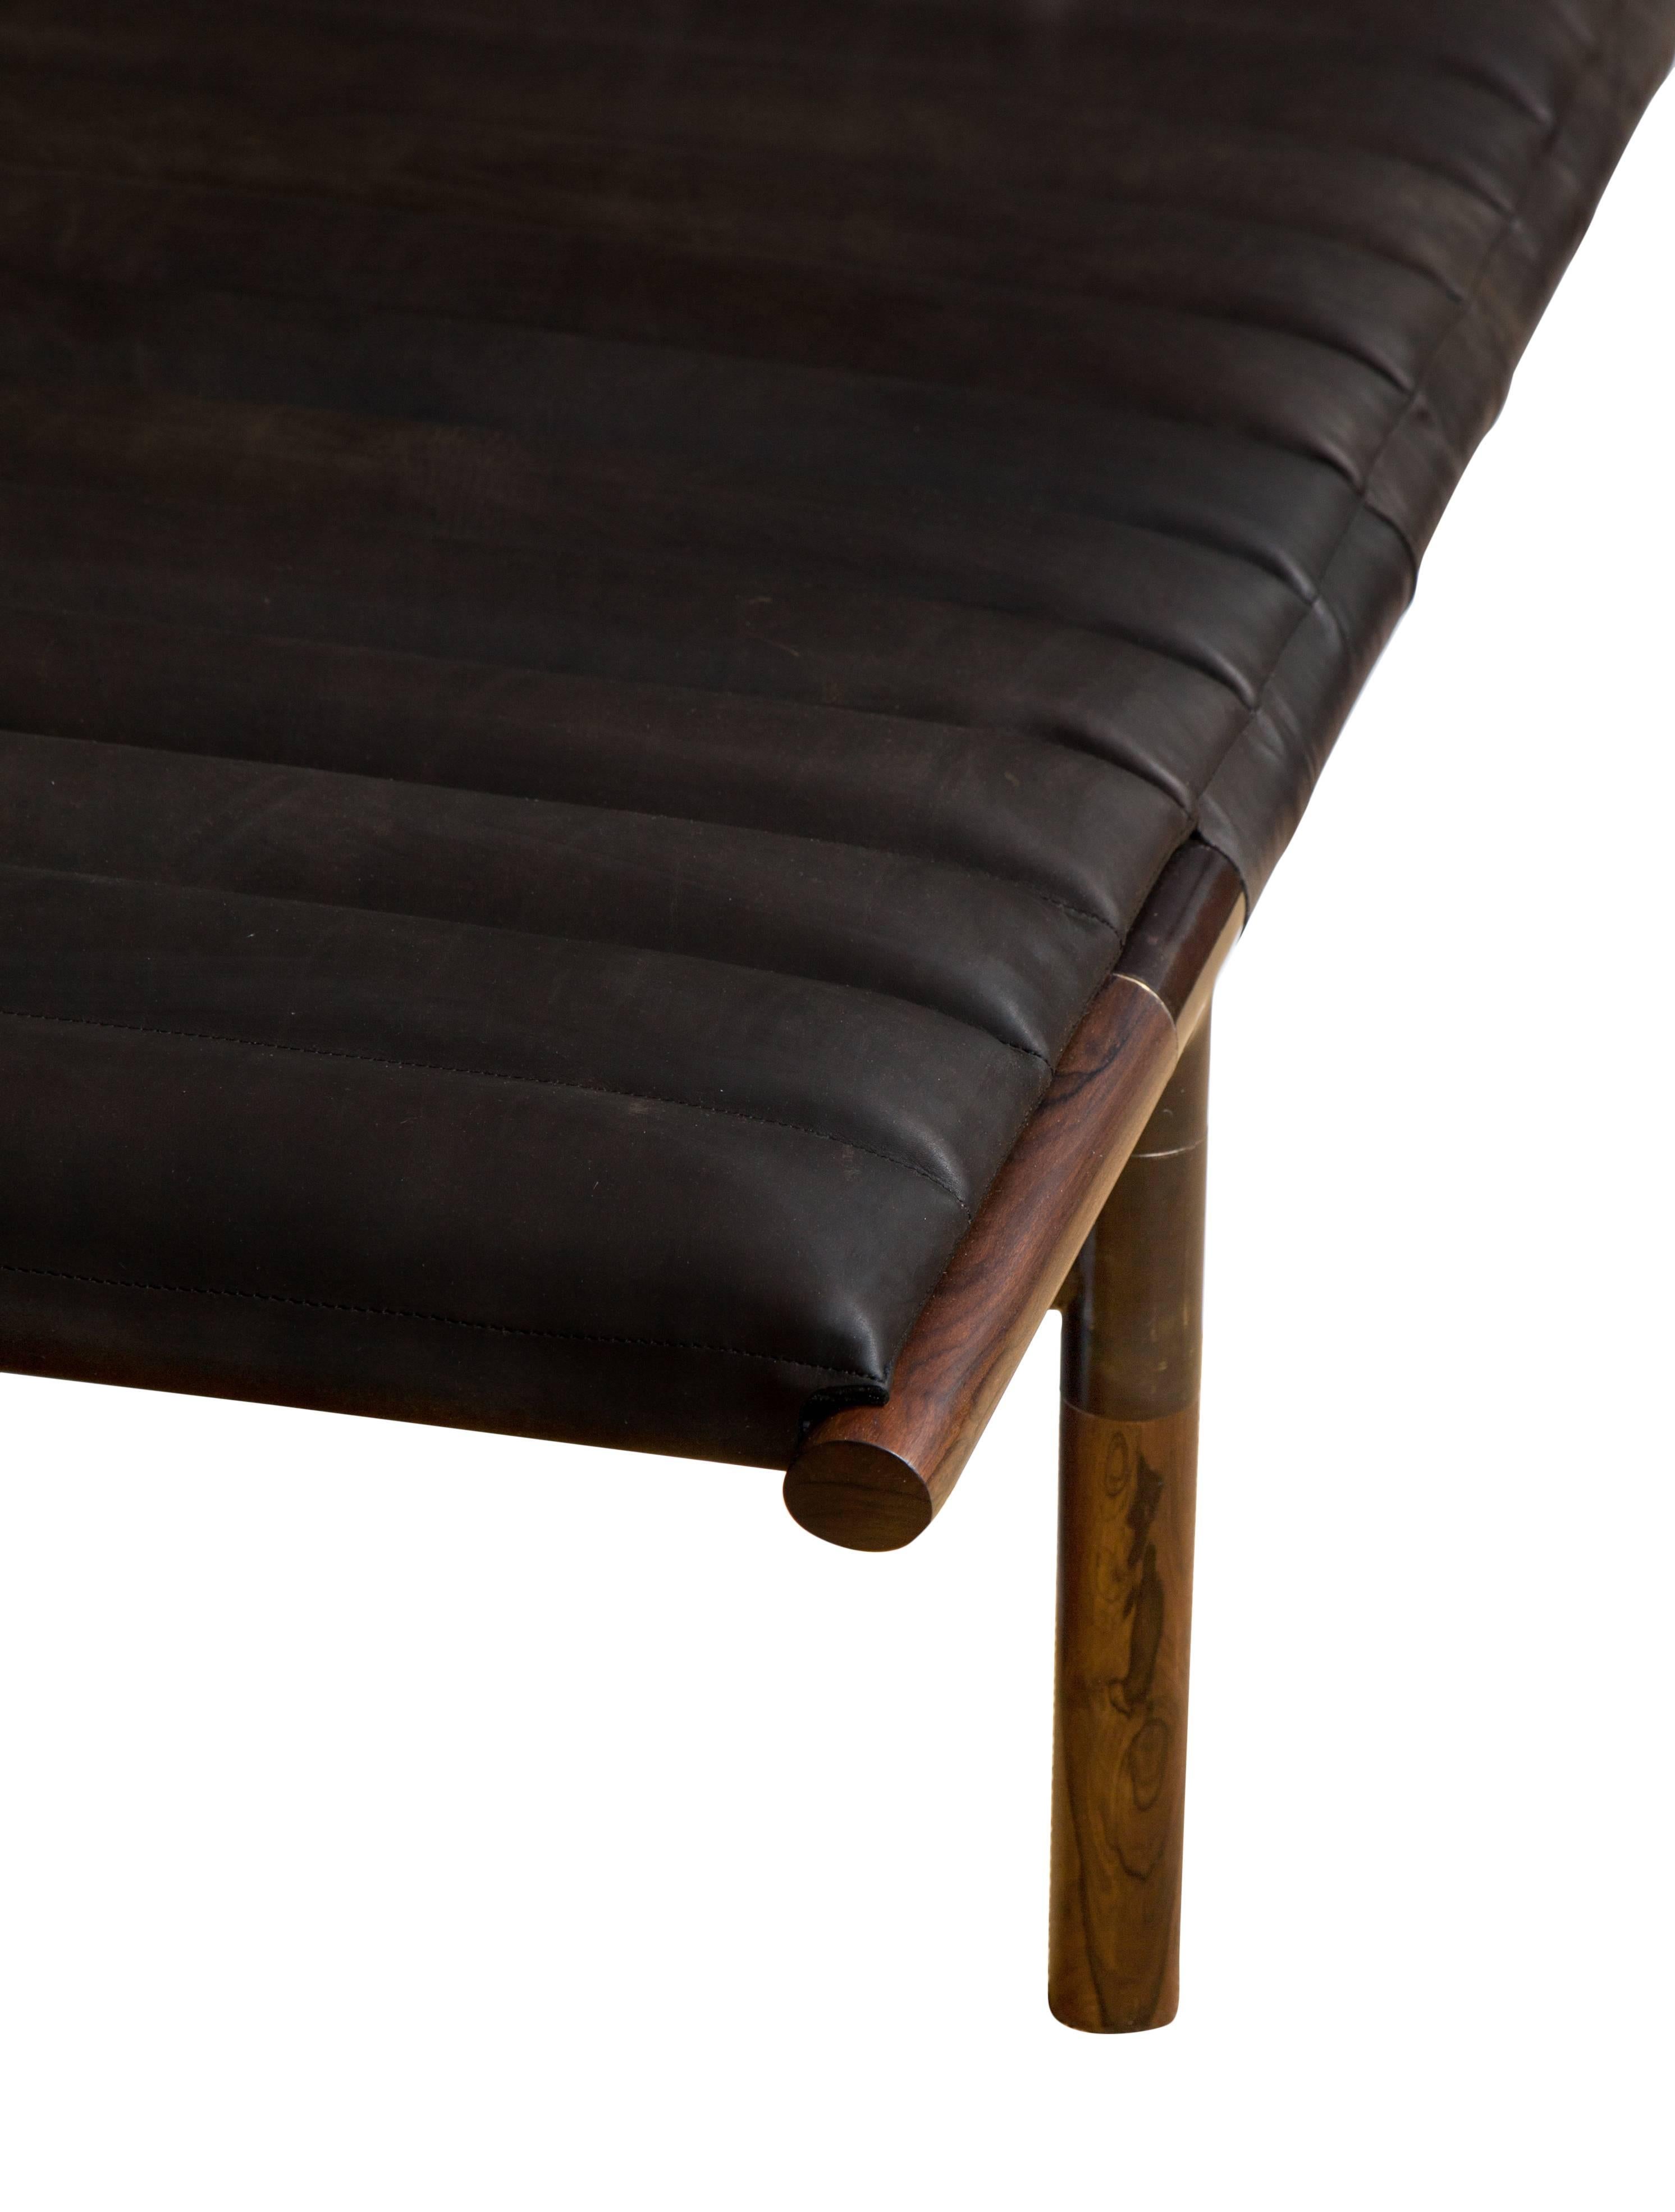 Ebonized rosewood daybed in ribbed Horween leather with blackened brass frame. Designed by Ben Erickson for Erickson Aesthetics .
Custom orders have a lead time of 10-12 weeks FOB NYC. Lead time contingent upon selection of finishes, approval of